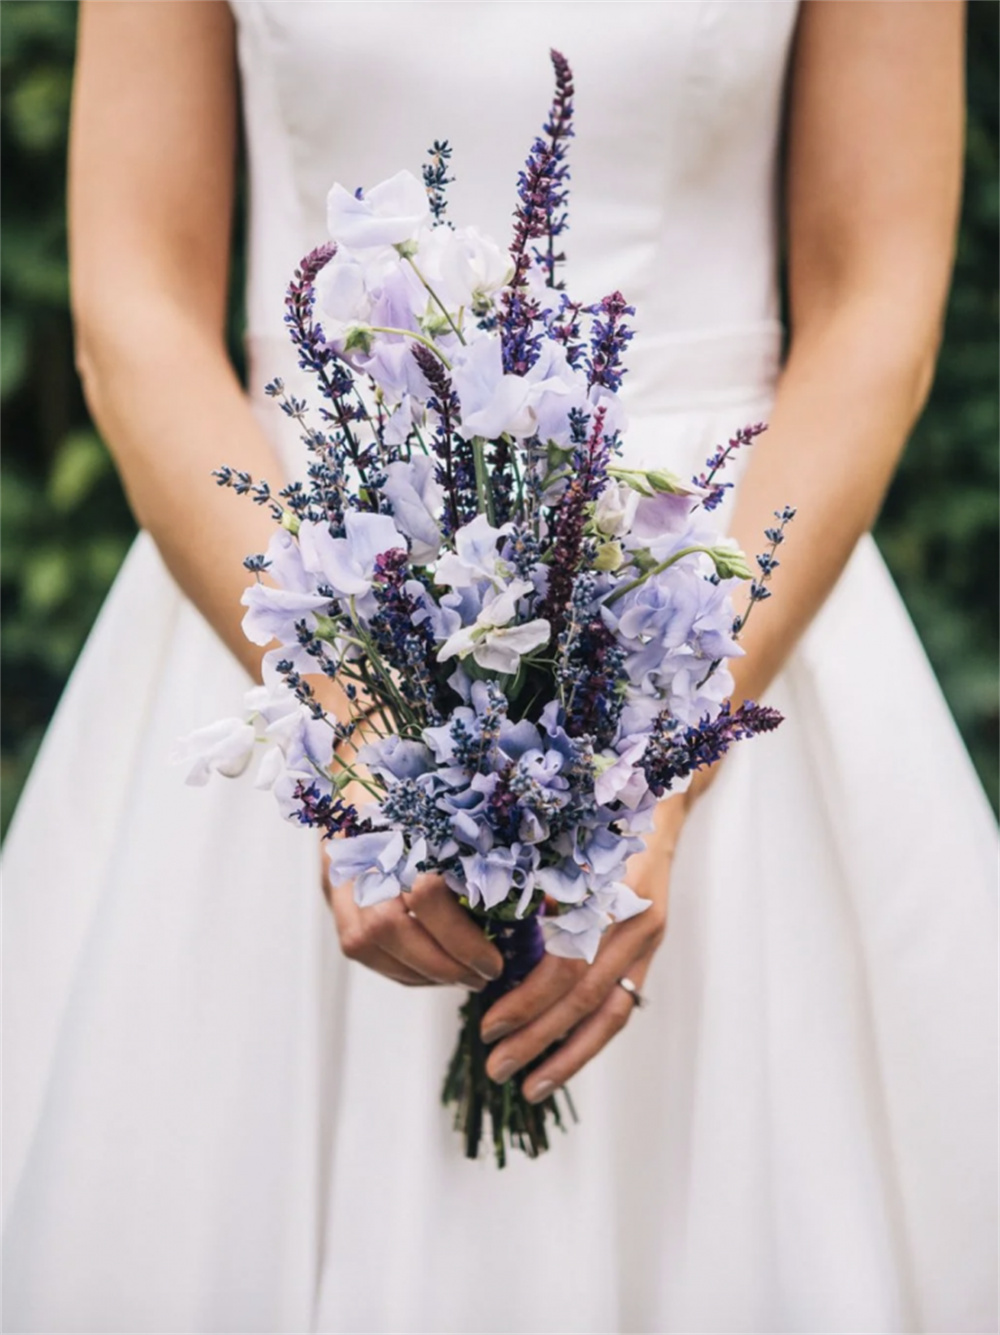 Winter Wedding Bouquet with Dried Lavender